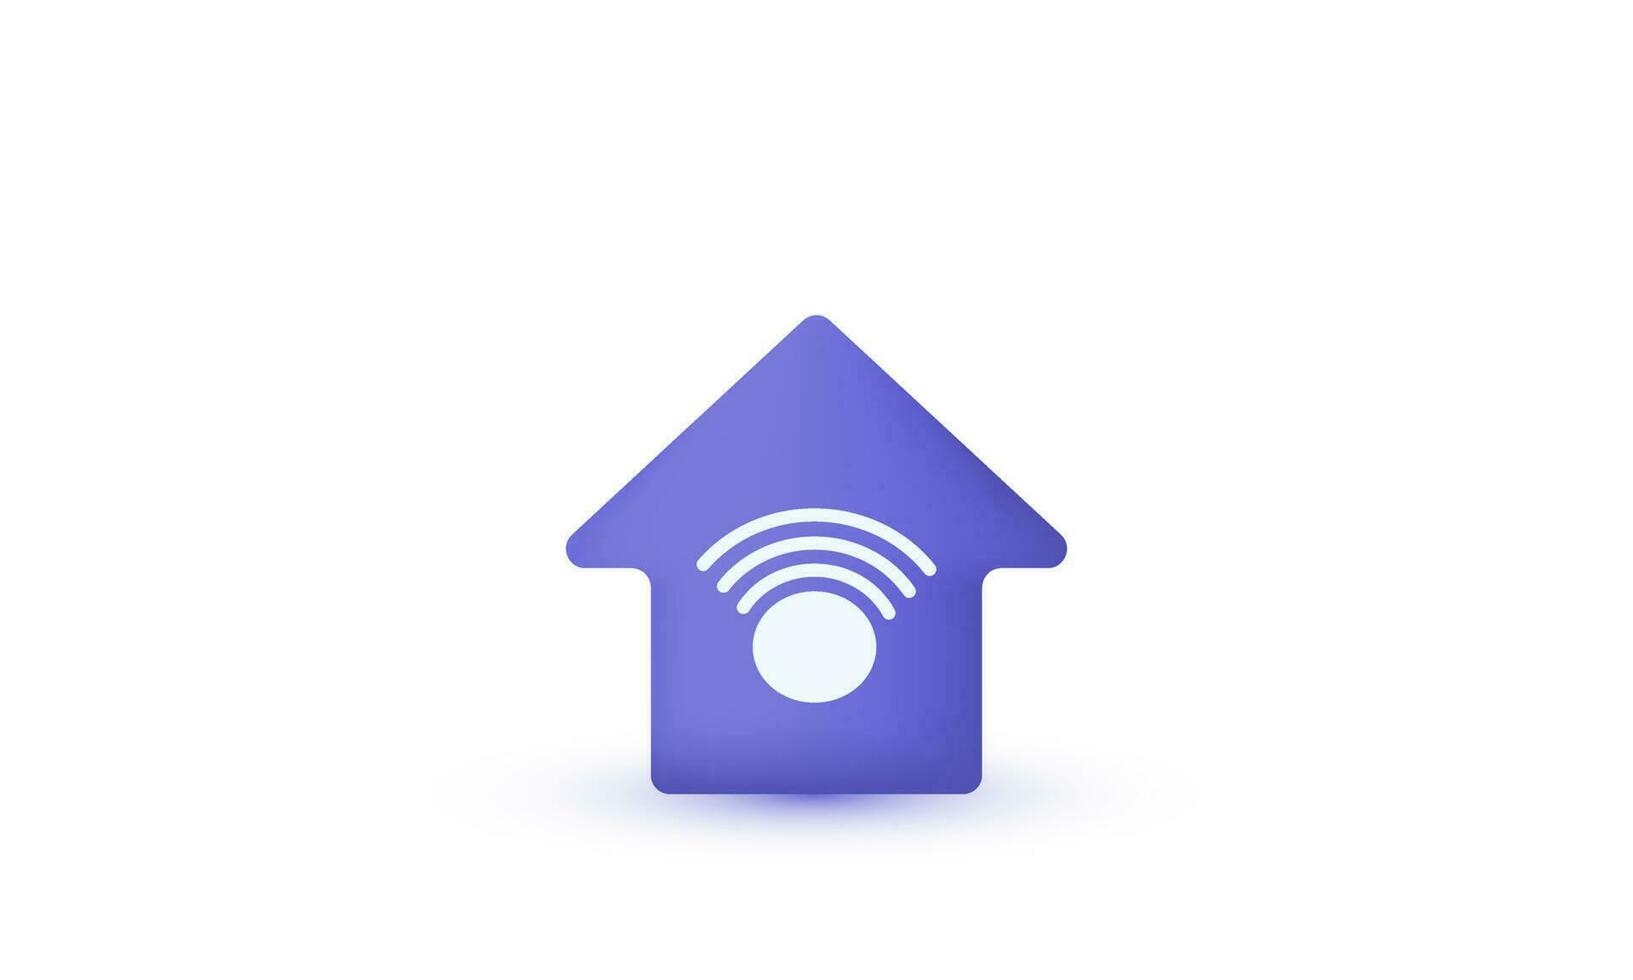 3d realistic wifi home illustration trendy icon modern style object symbols illustration isolated on background vector